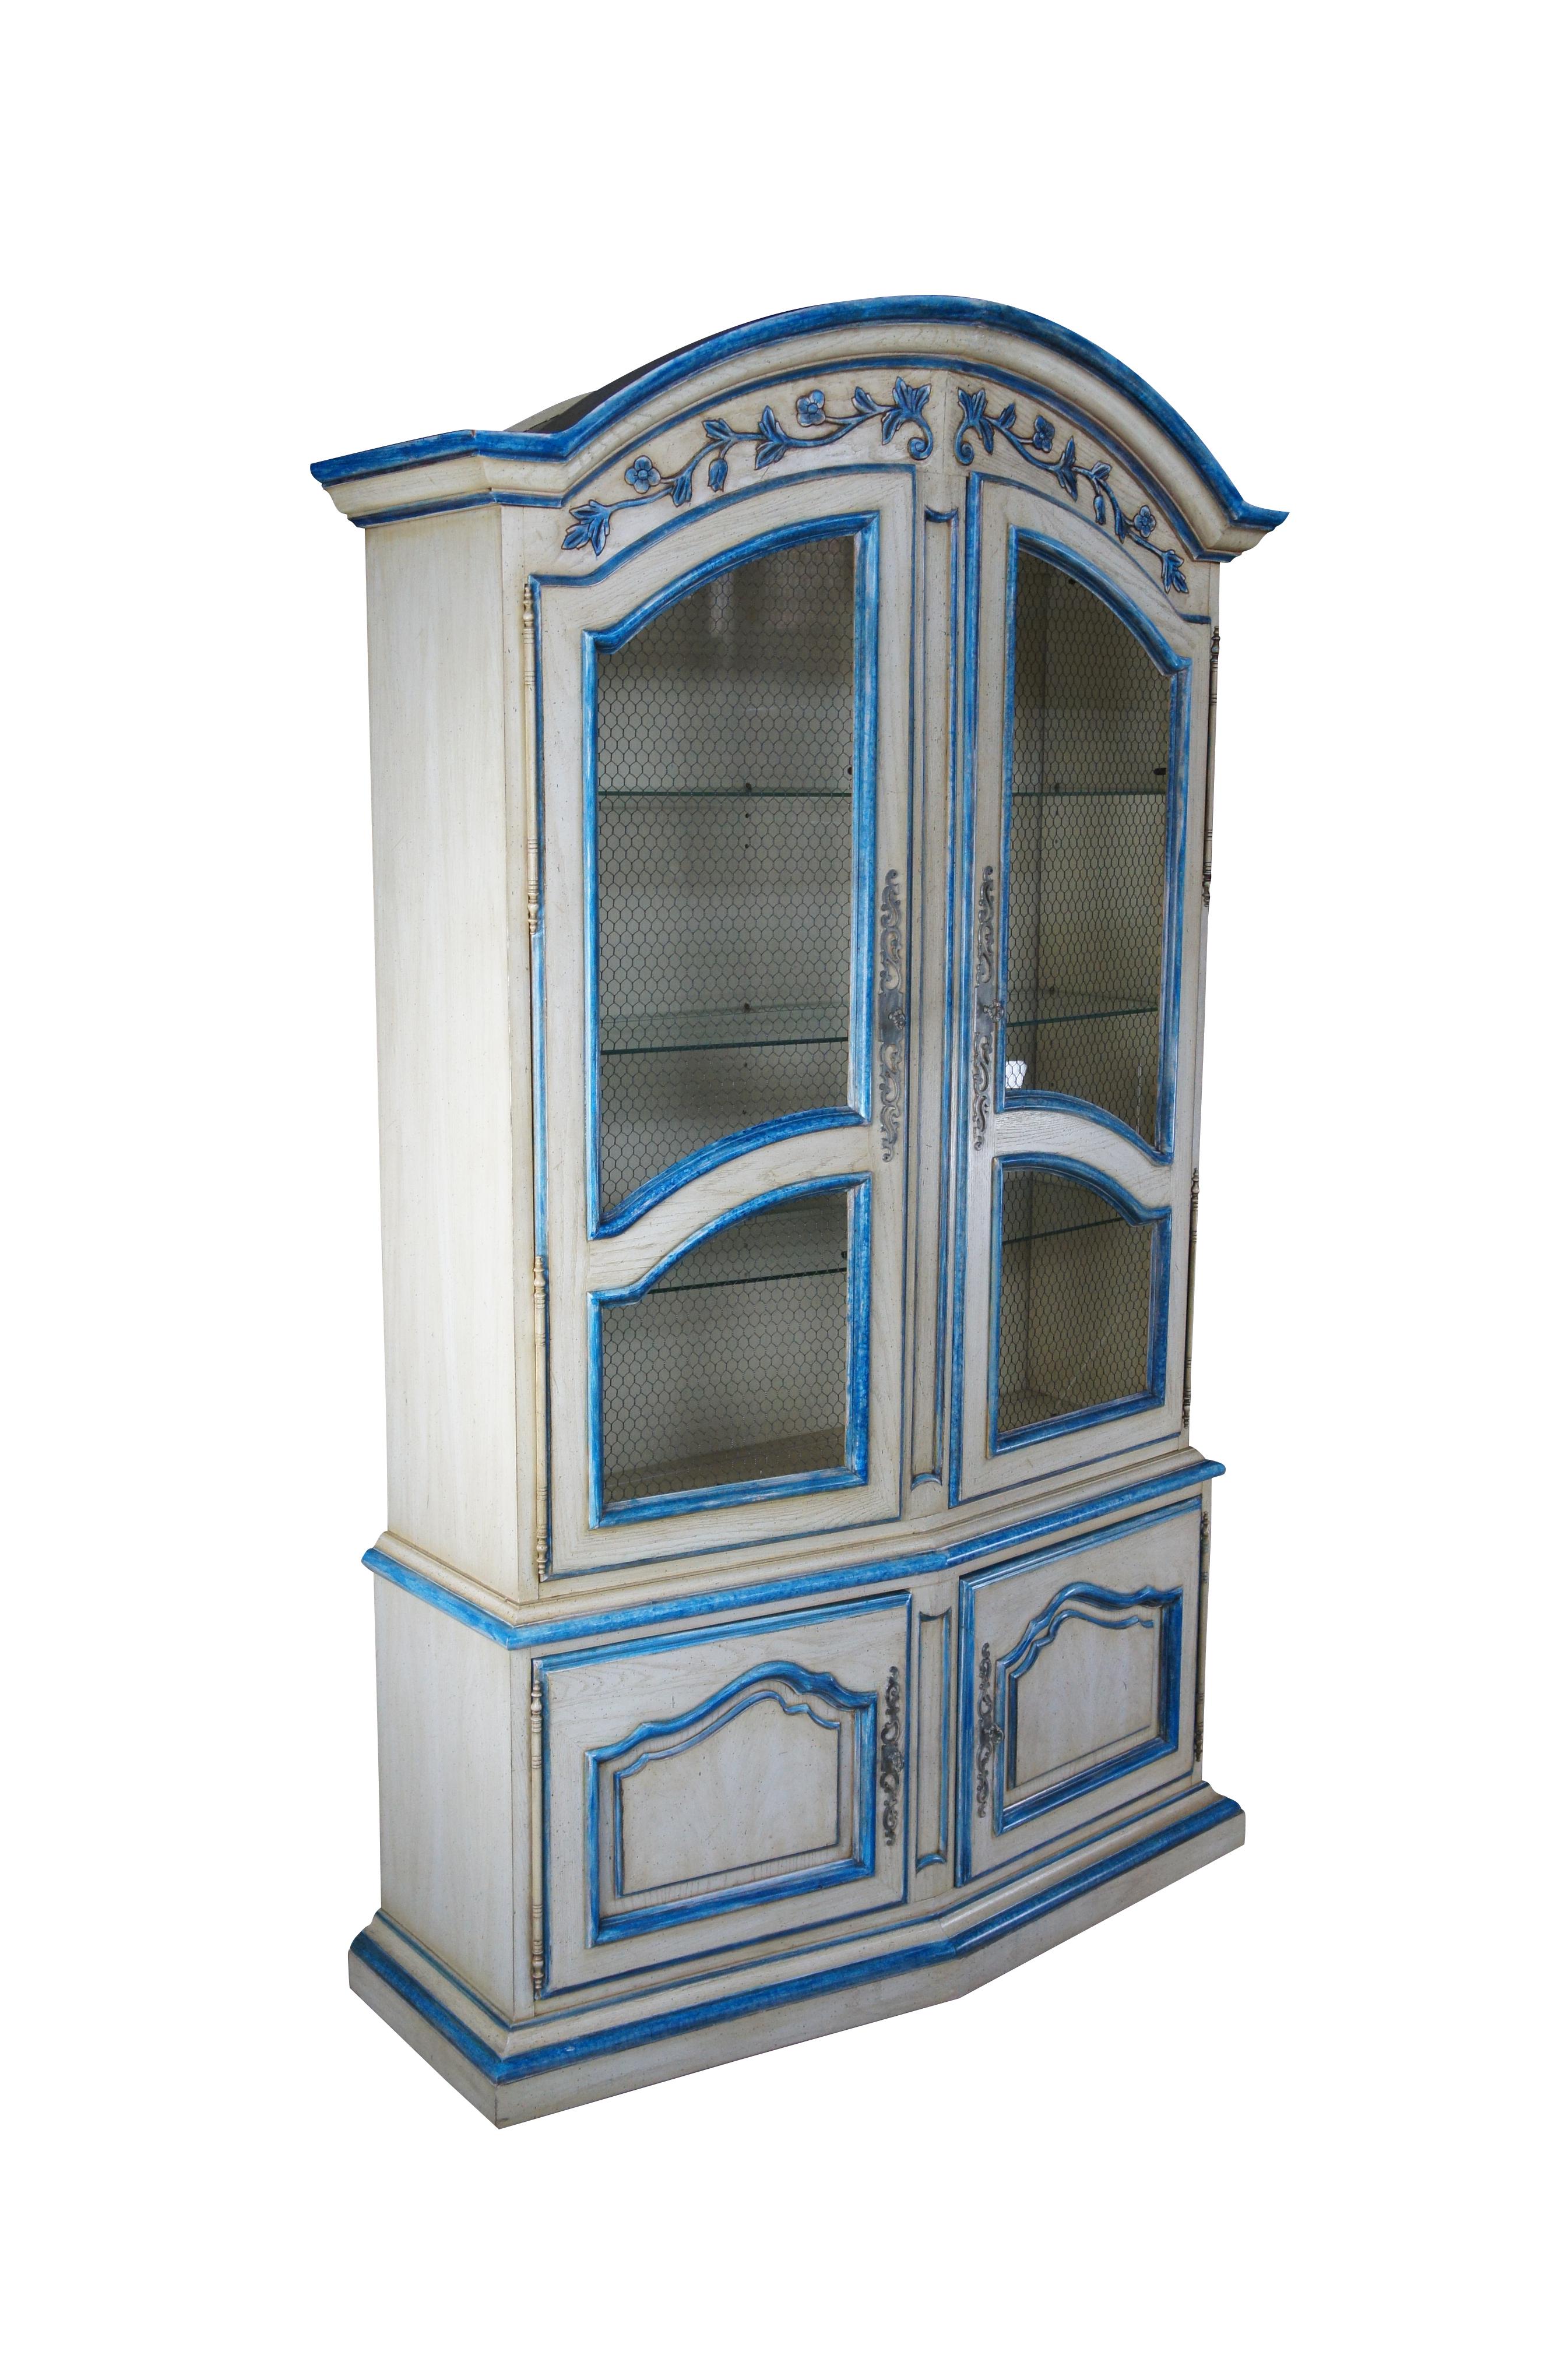 A beautiful farmhouse curio cabinet or showcase, circa 1940s.  Drawing inspiration from French Country and Italian Provincial design.  Made from oak with an off white finish trimmed in blue.  Features a domed hutch with foliate carved crown, chicken